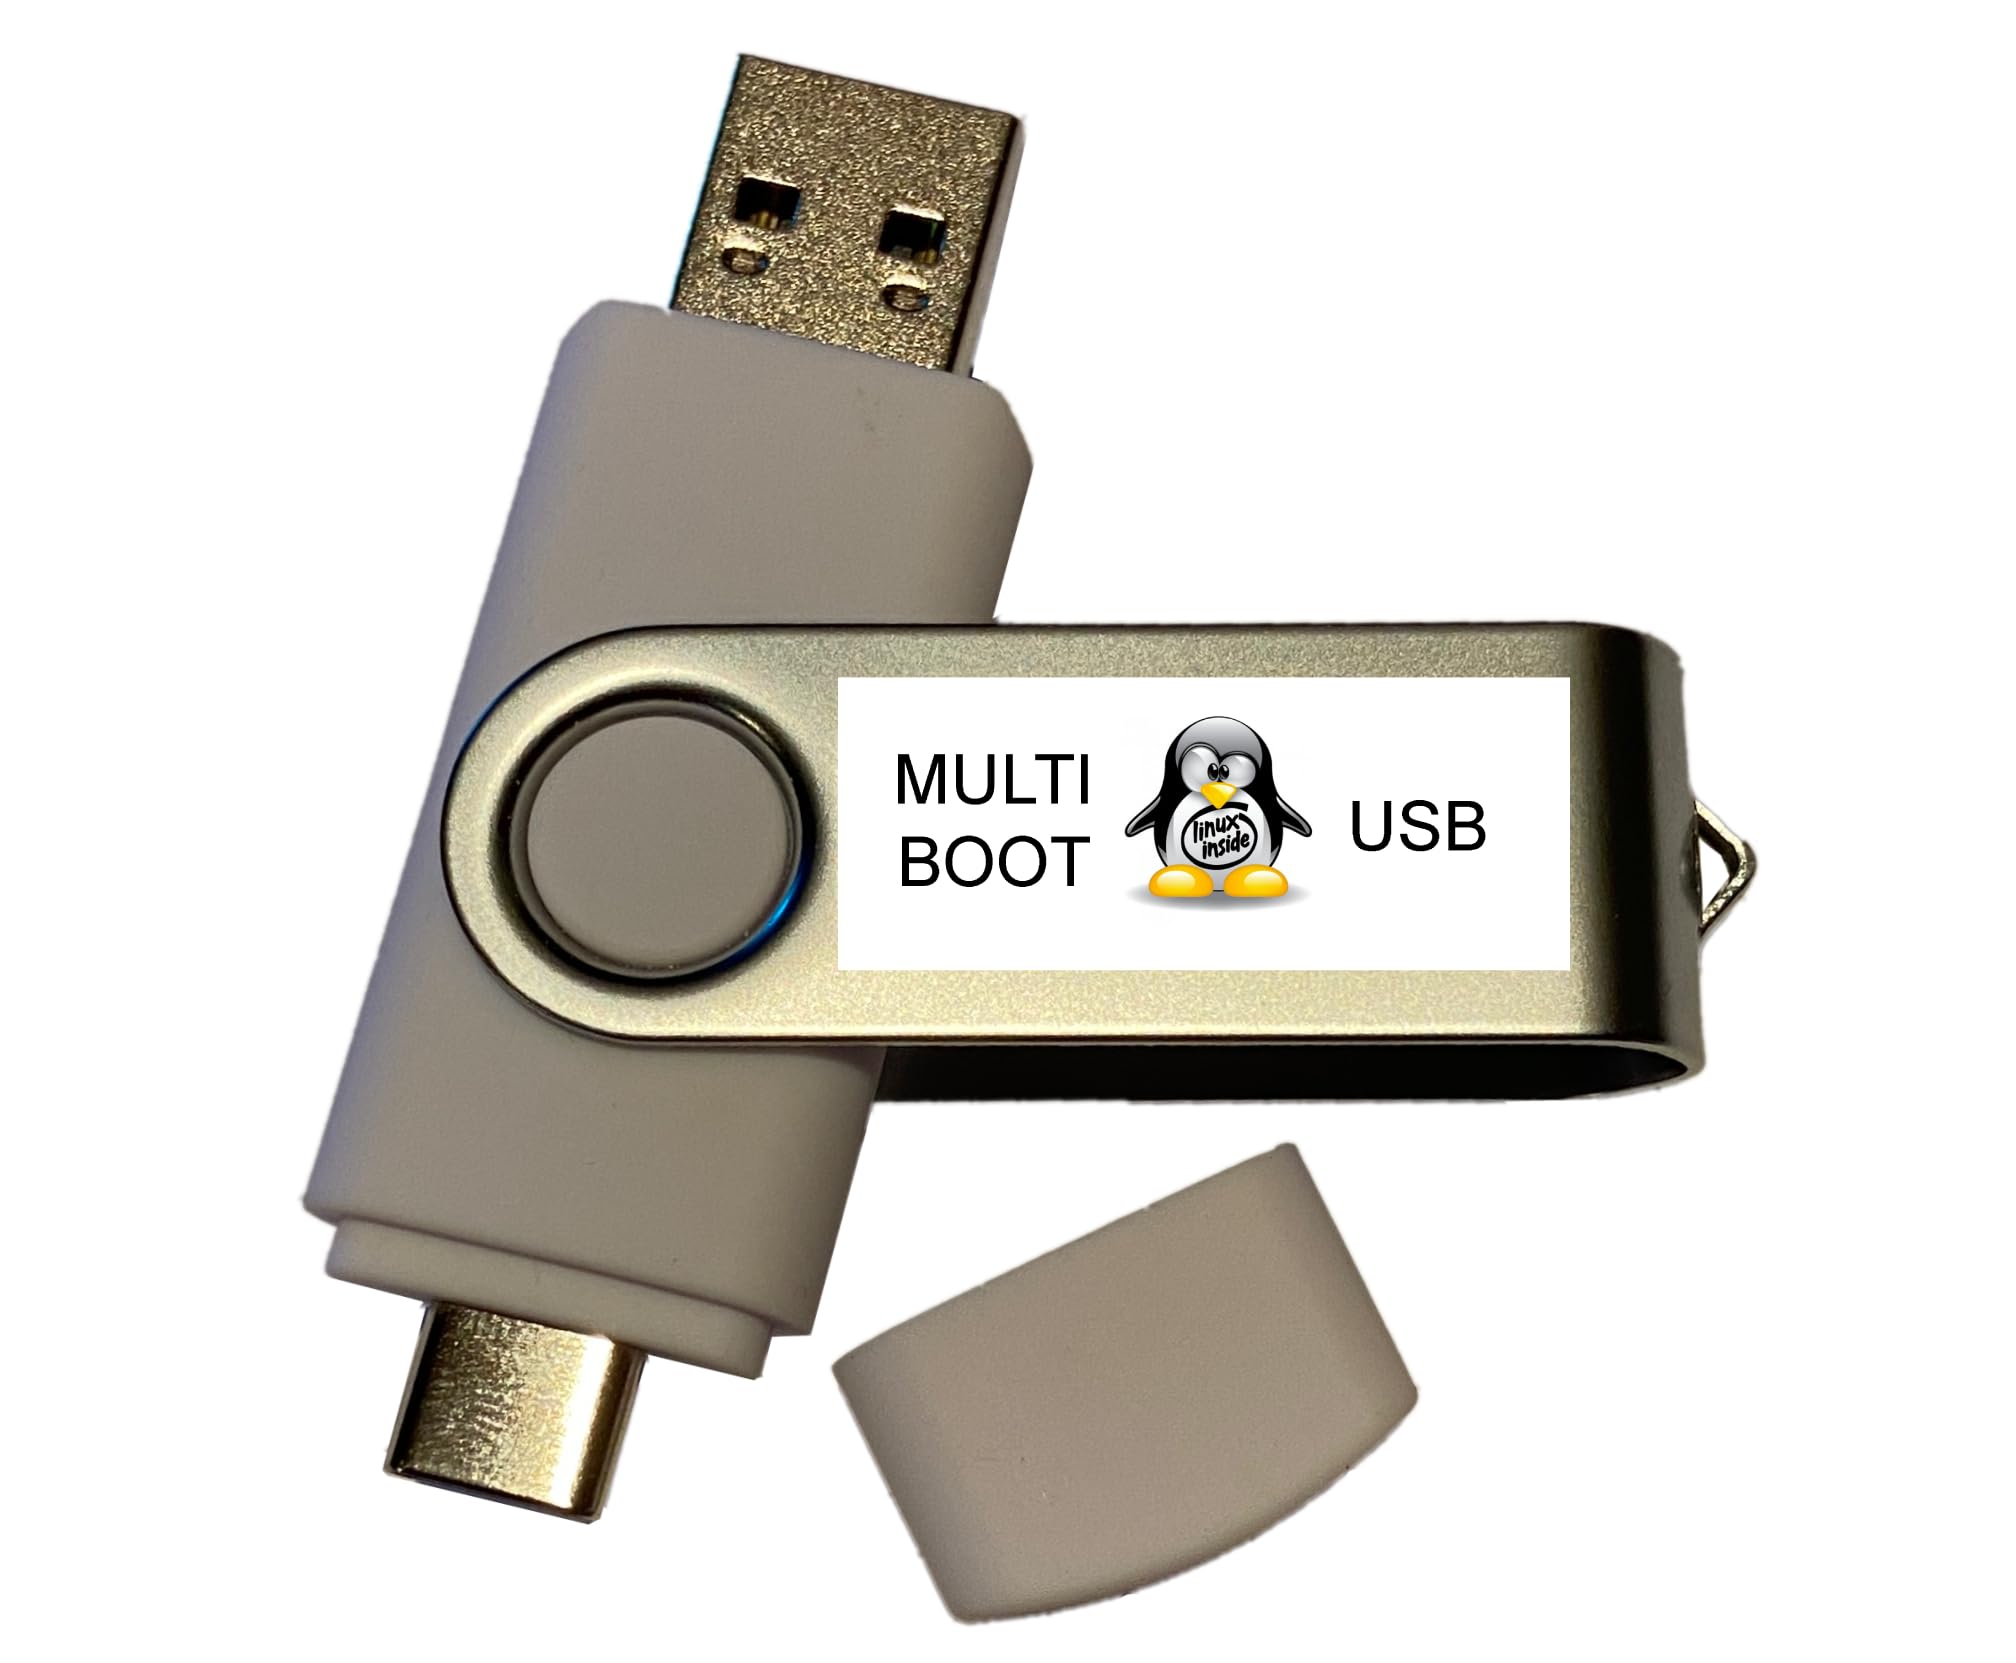 USB flash drive with bootable installer